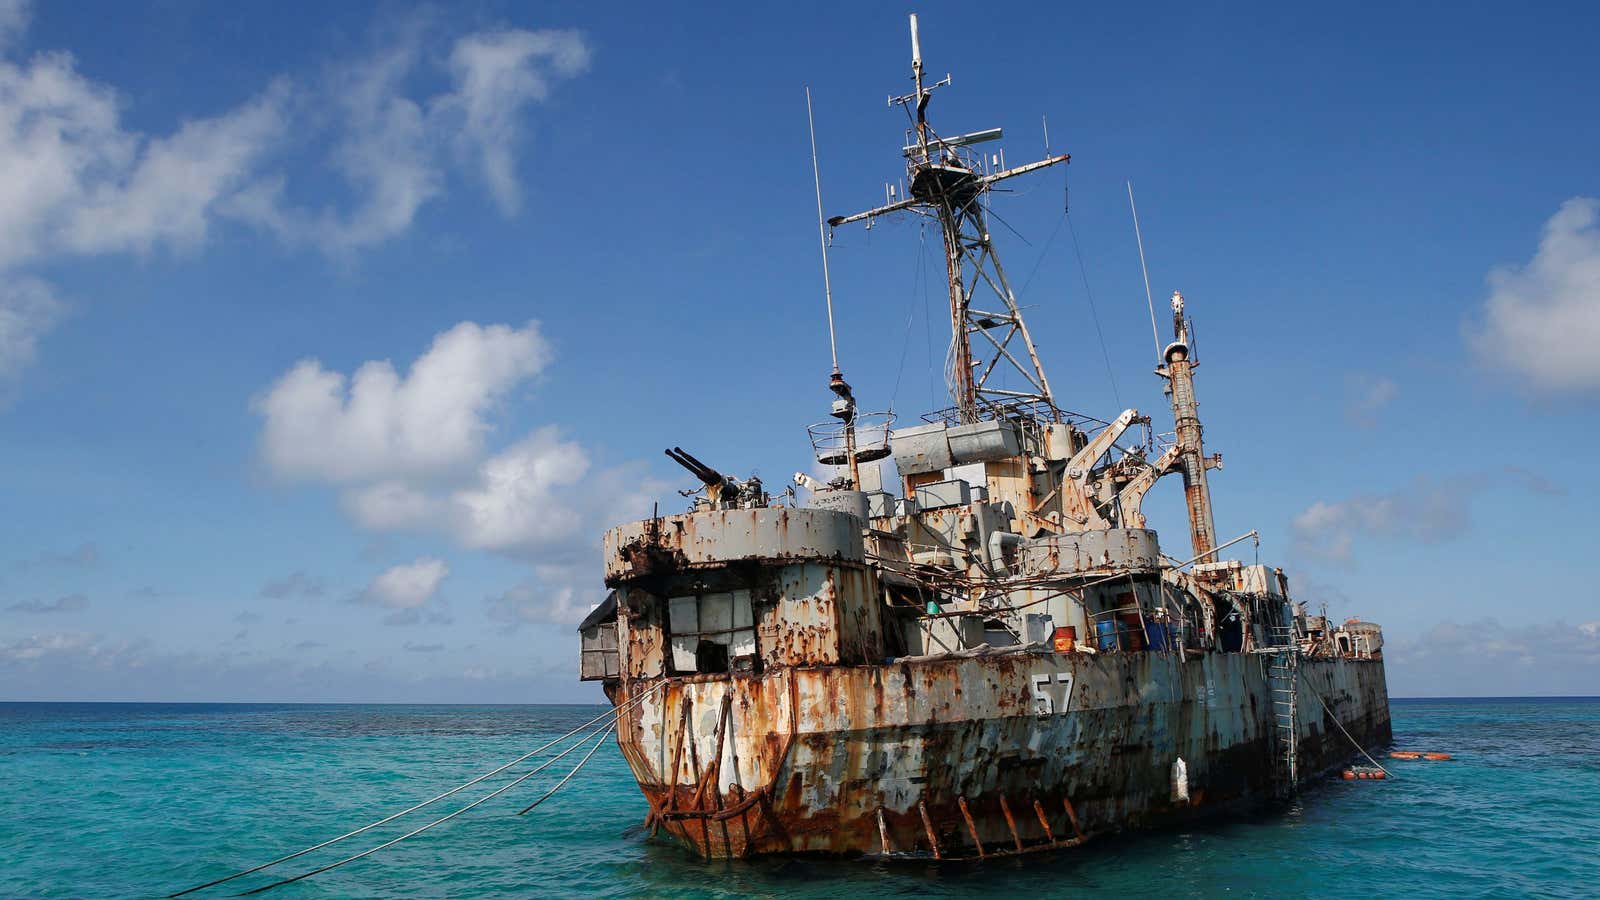 The BRP Sierra Madre, a marooned transport ship Philippine Marines live on as a military outpost.